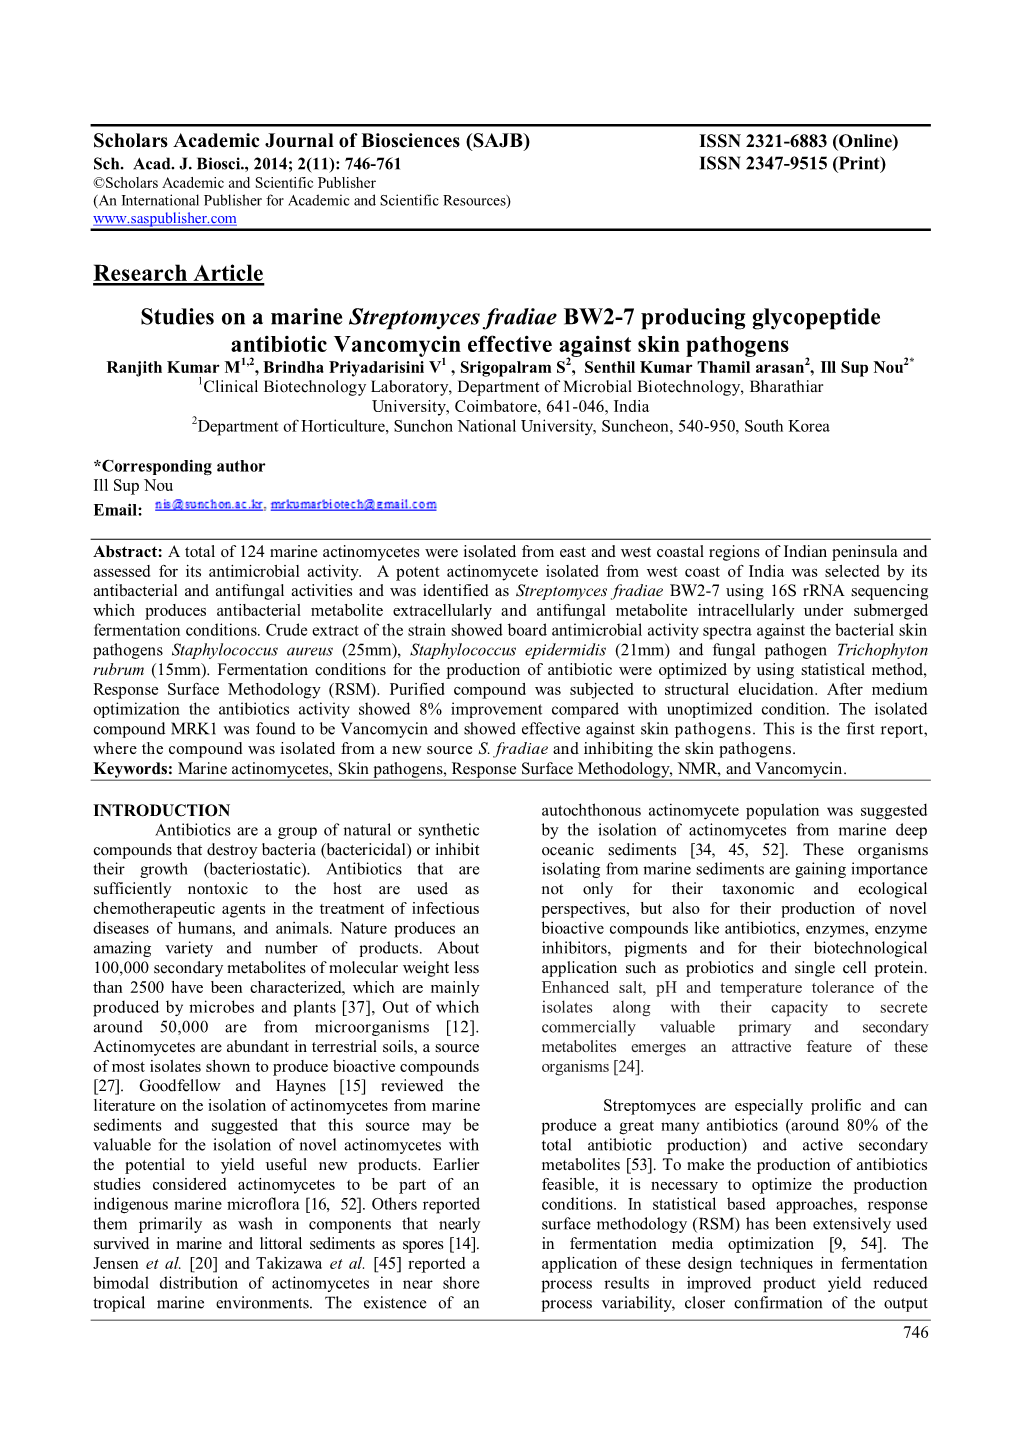 Research Article Studies on a Marine Streptomyces Fradiae BW2-7